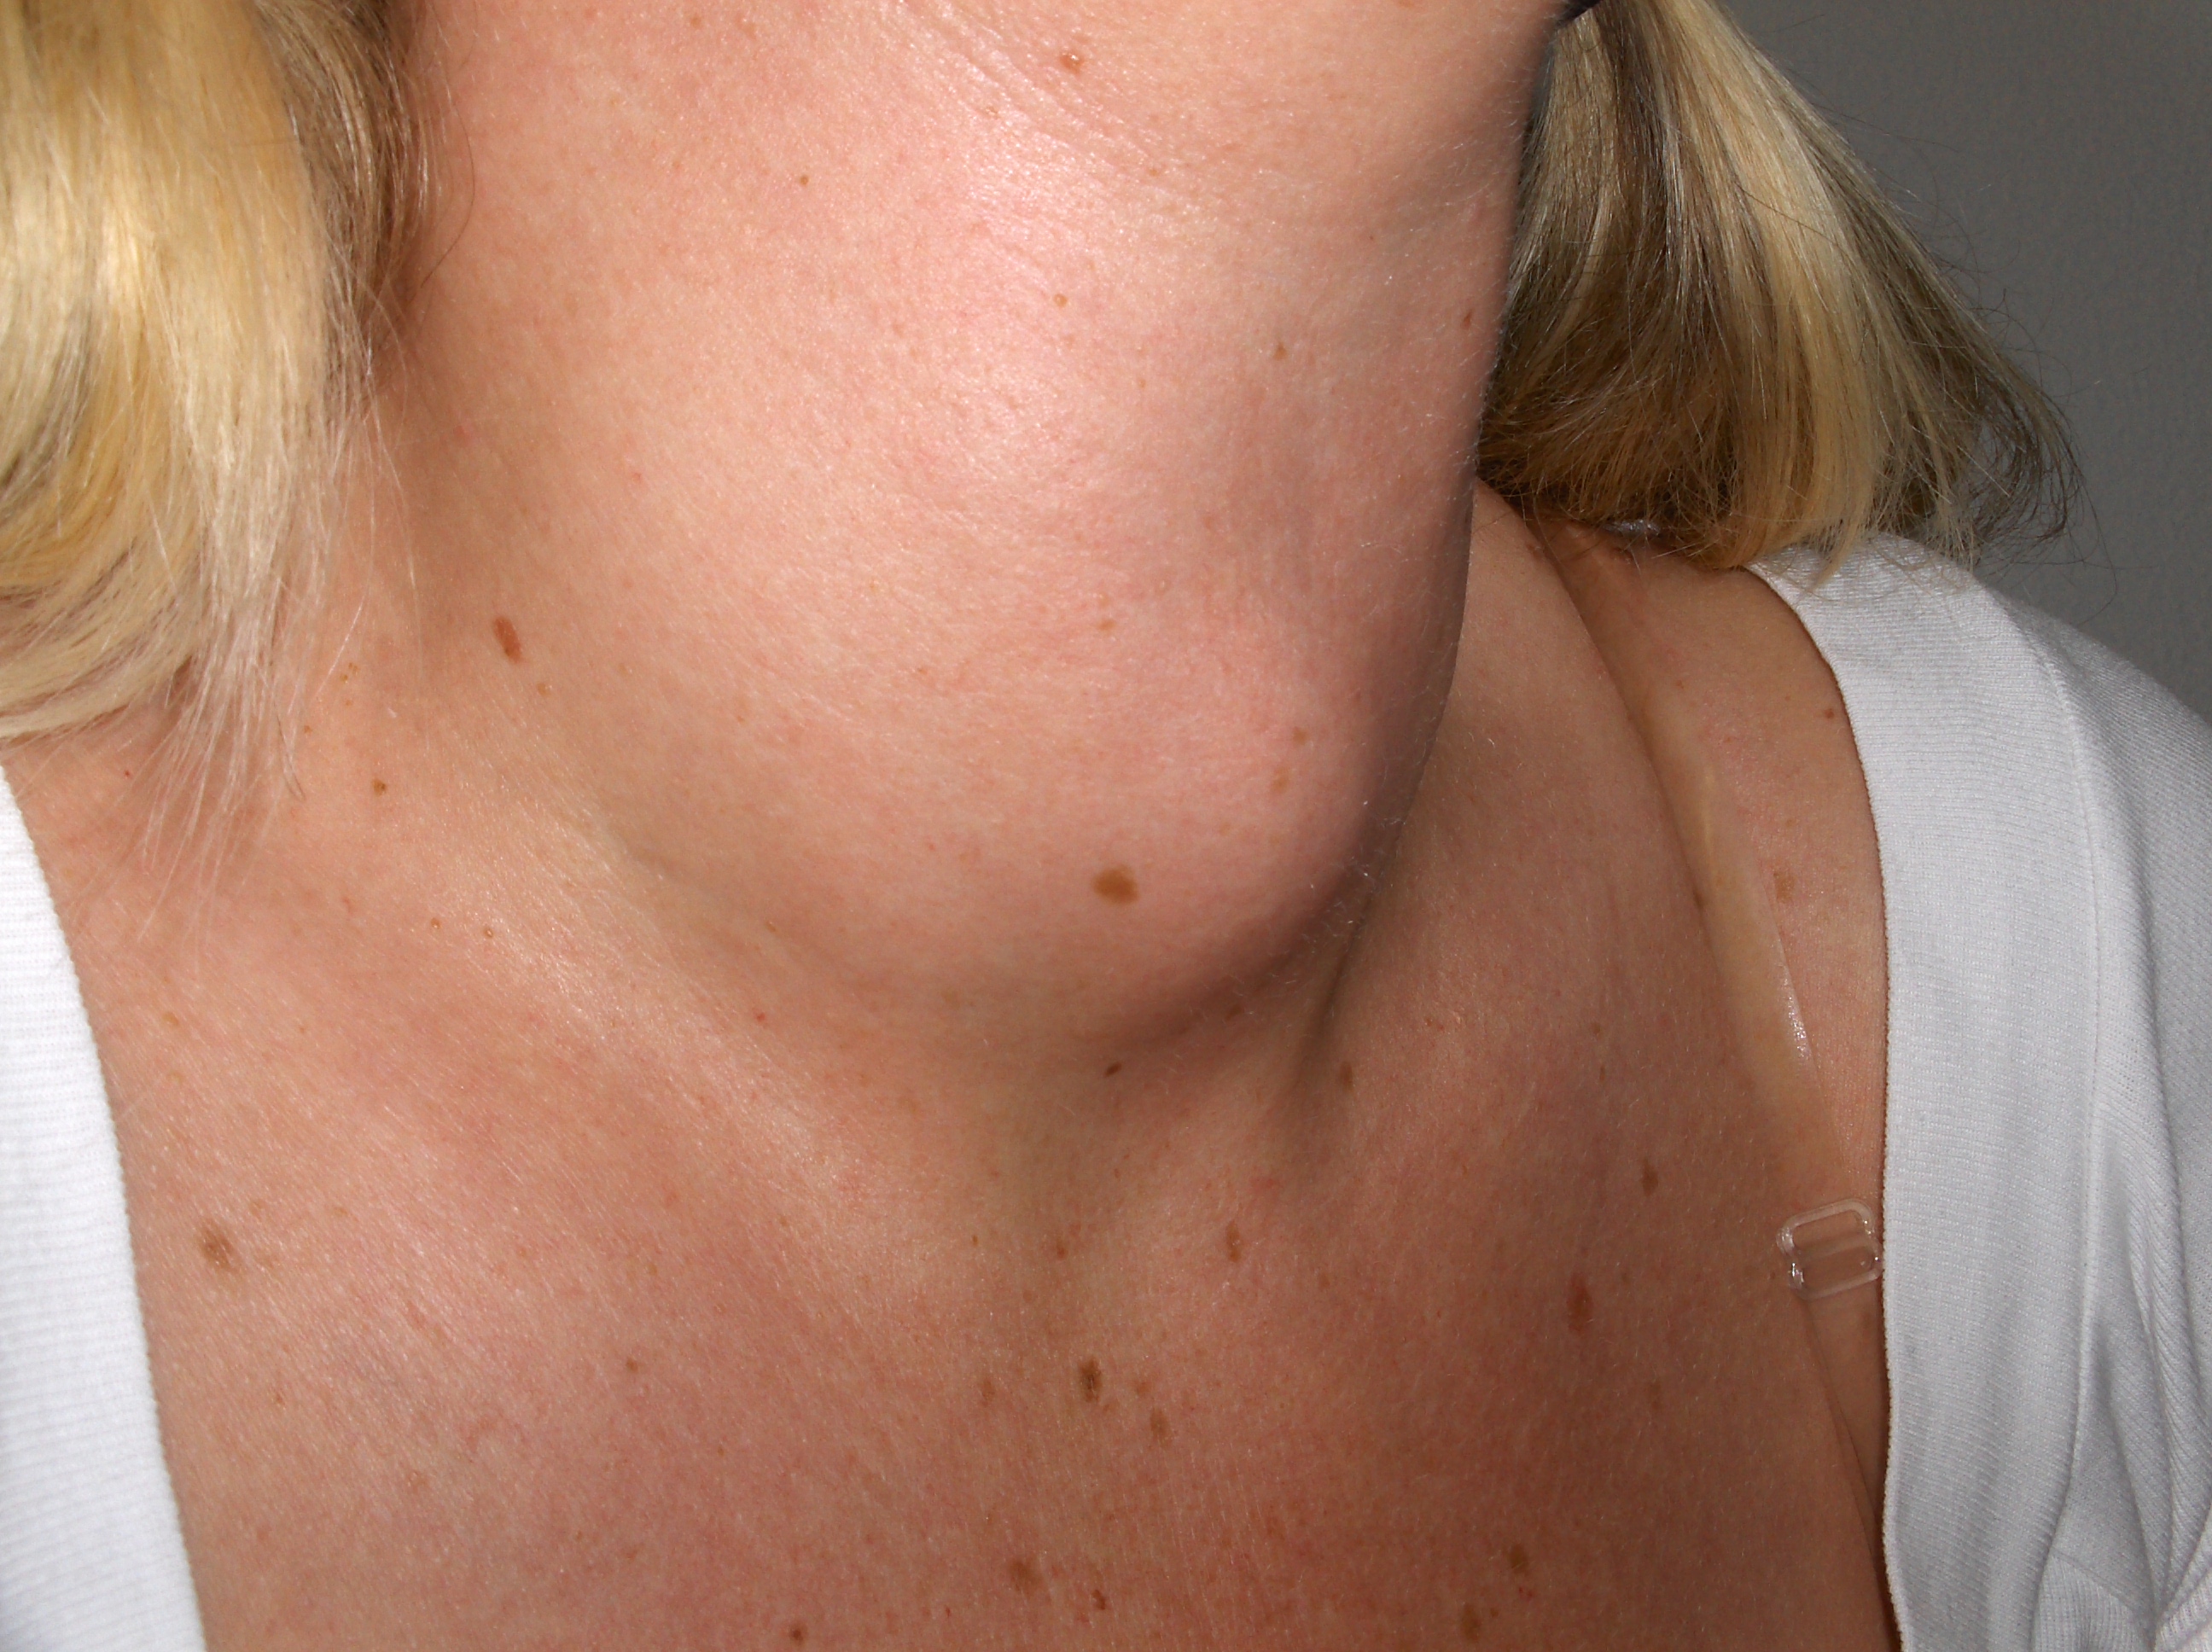 ﻿Hyperthyroidism more commonly affects women